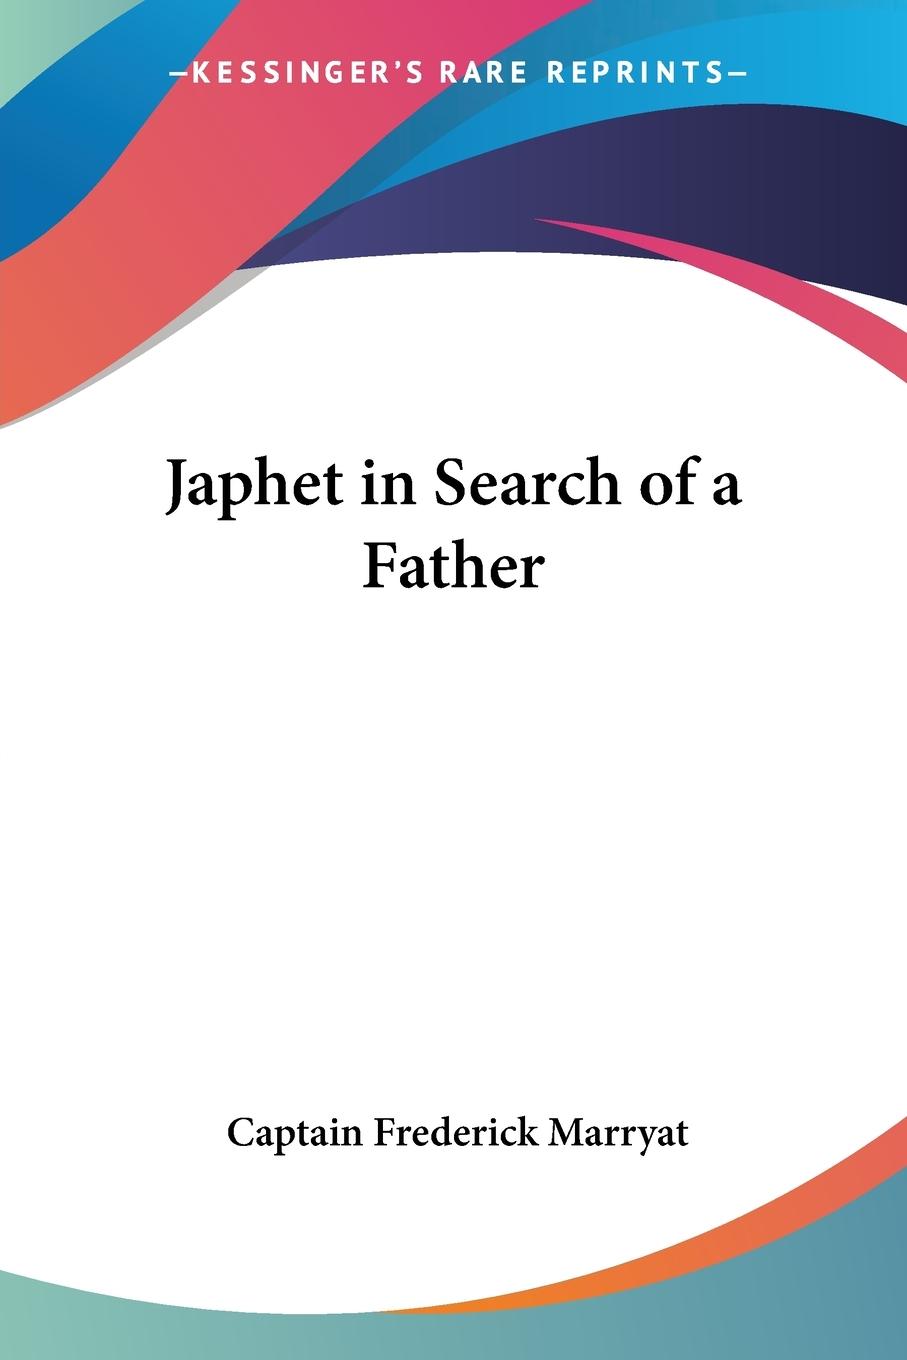 Japhet in Search of a Father - Marryat, Captain Frederick